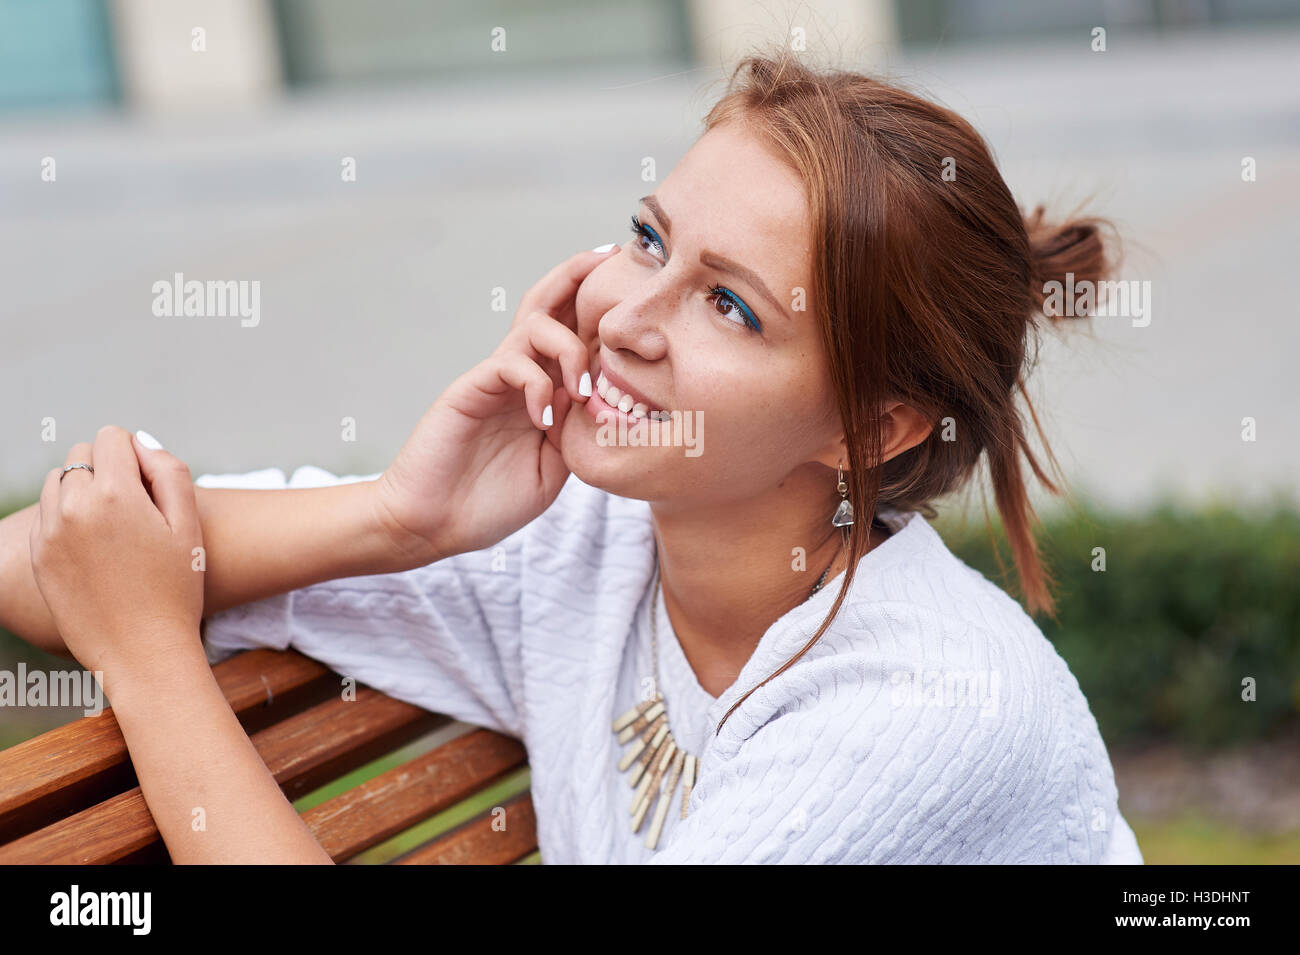 Beautiful young woman sits on a bench in the summer park Stock Photo